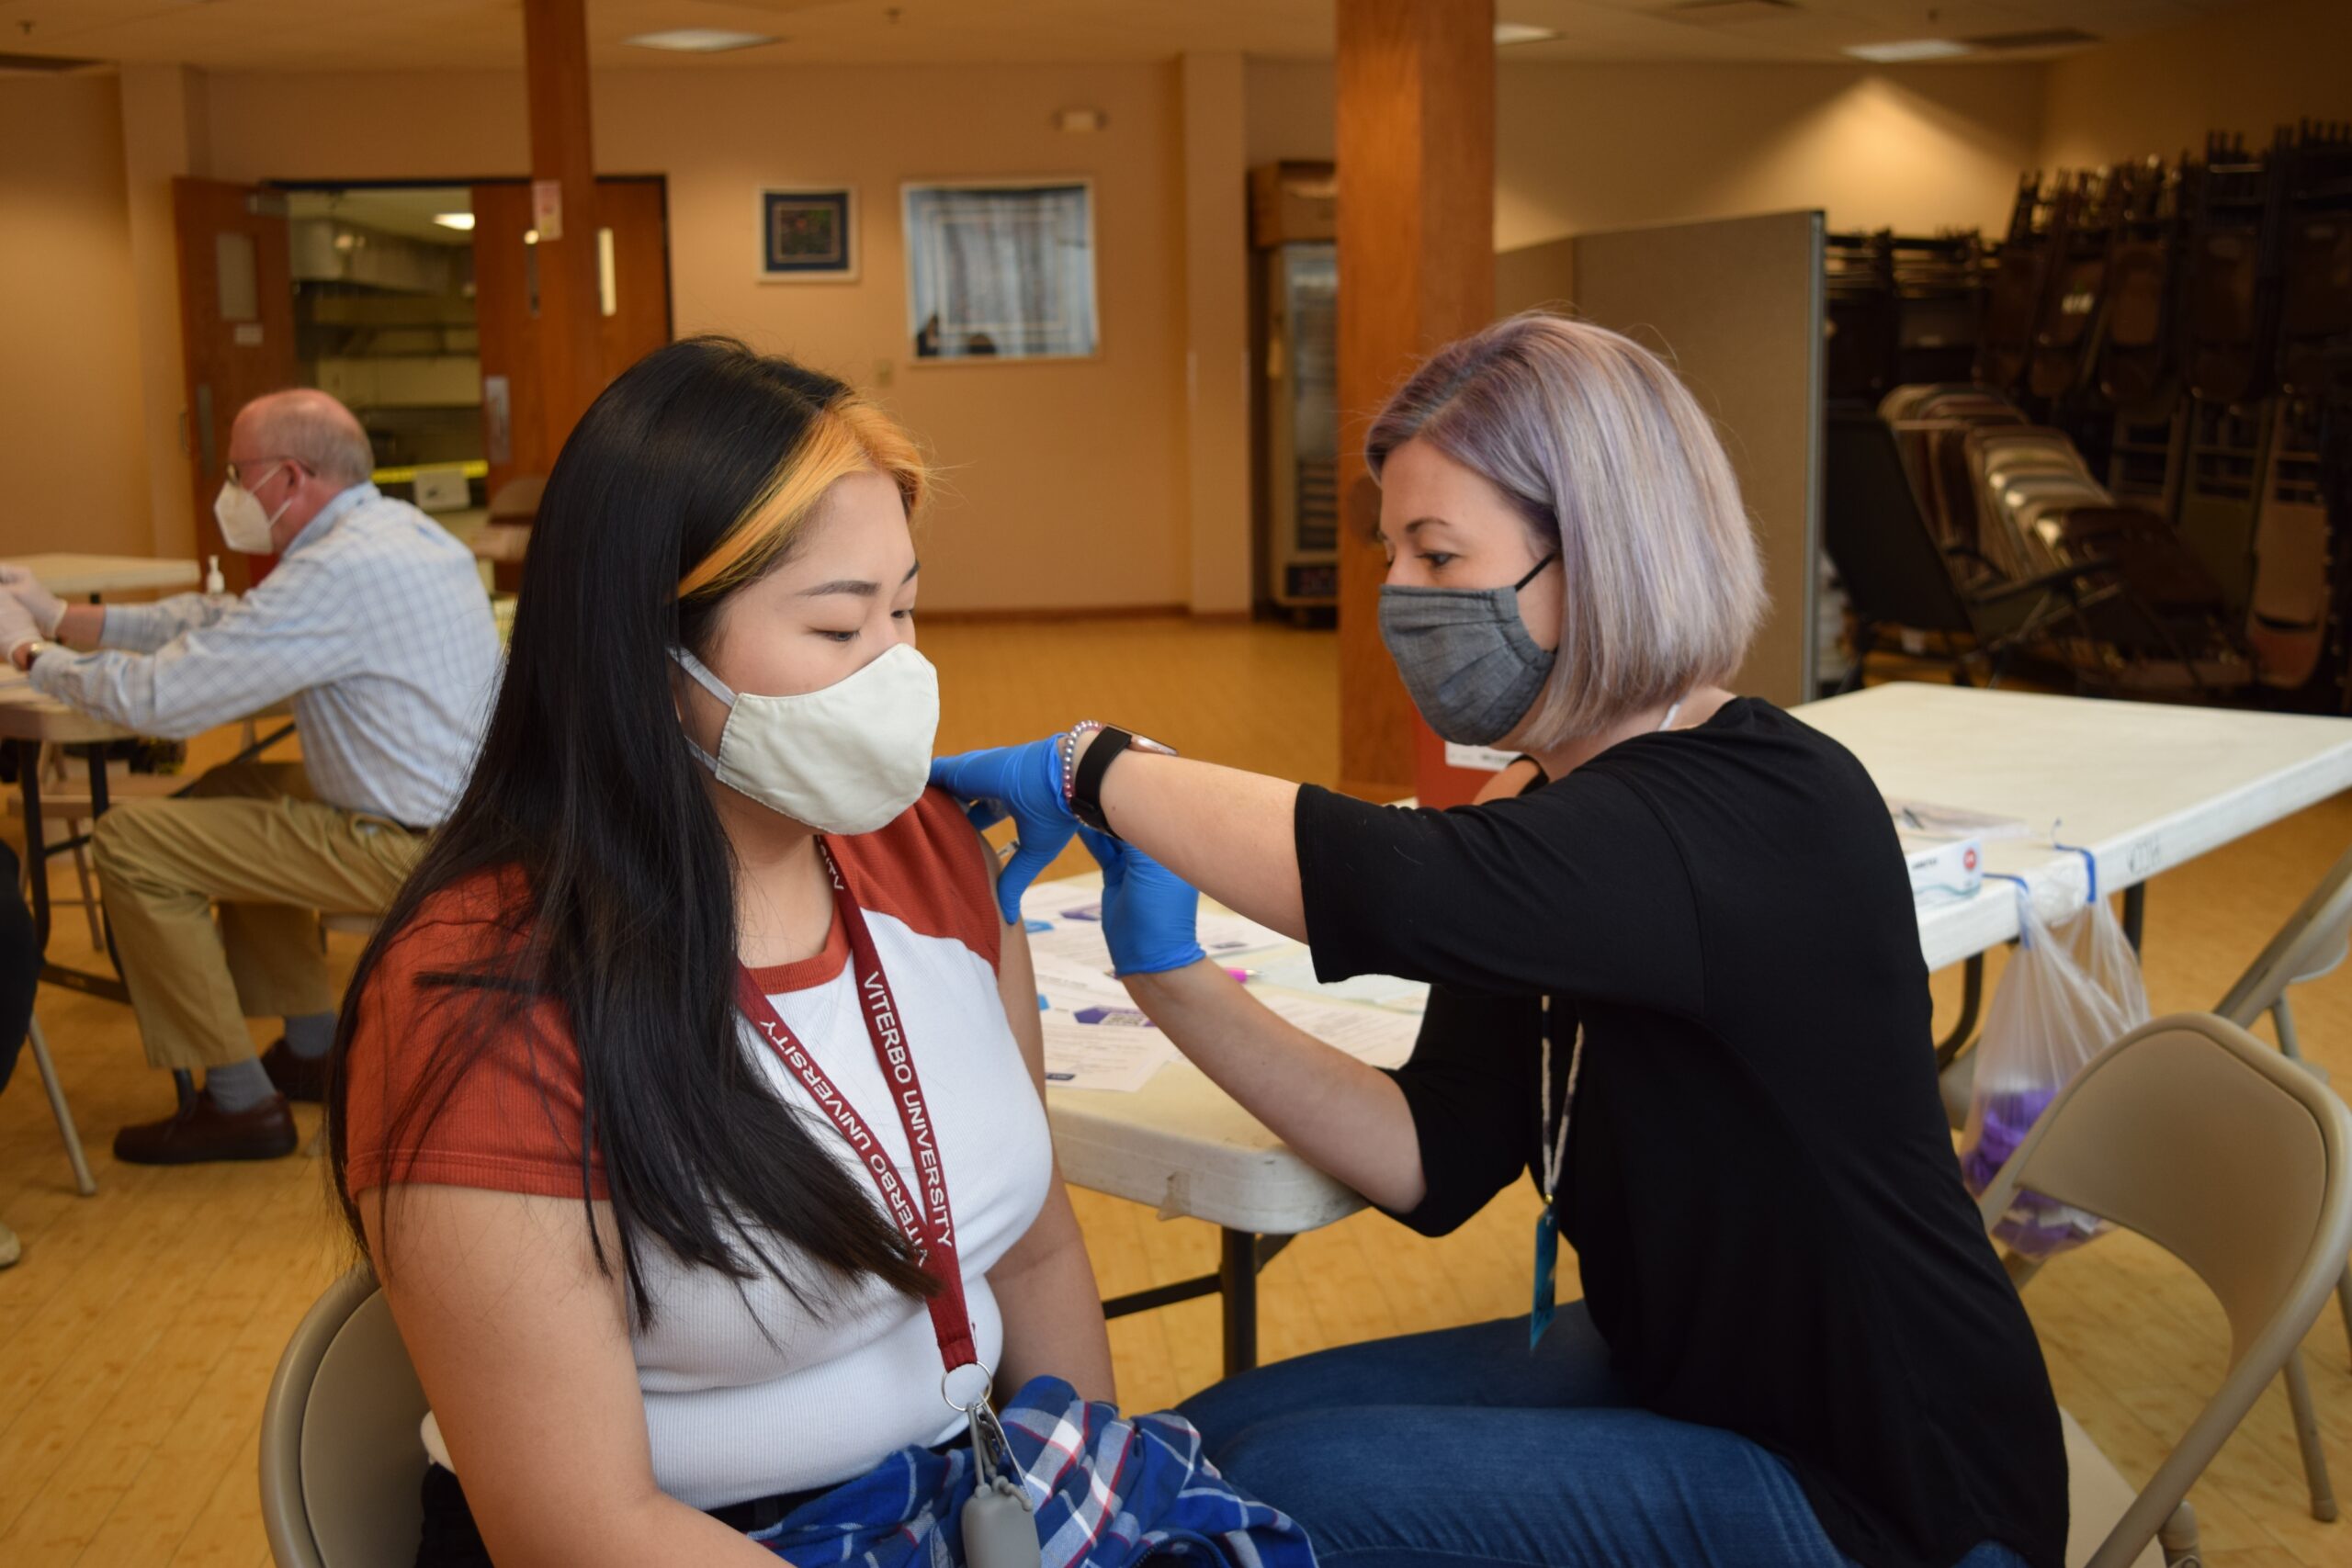 Hmong Organizations Help Community Access COVID-19 Vaccines, Public Health Information